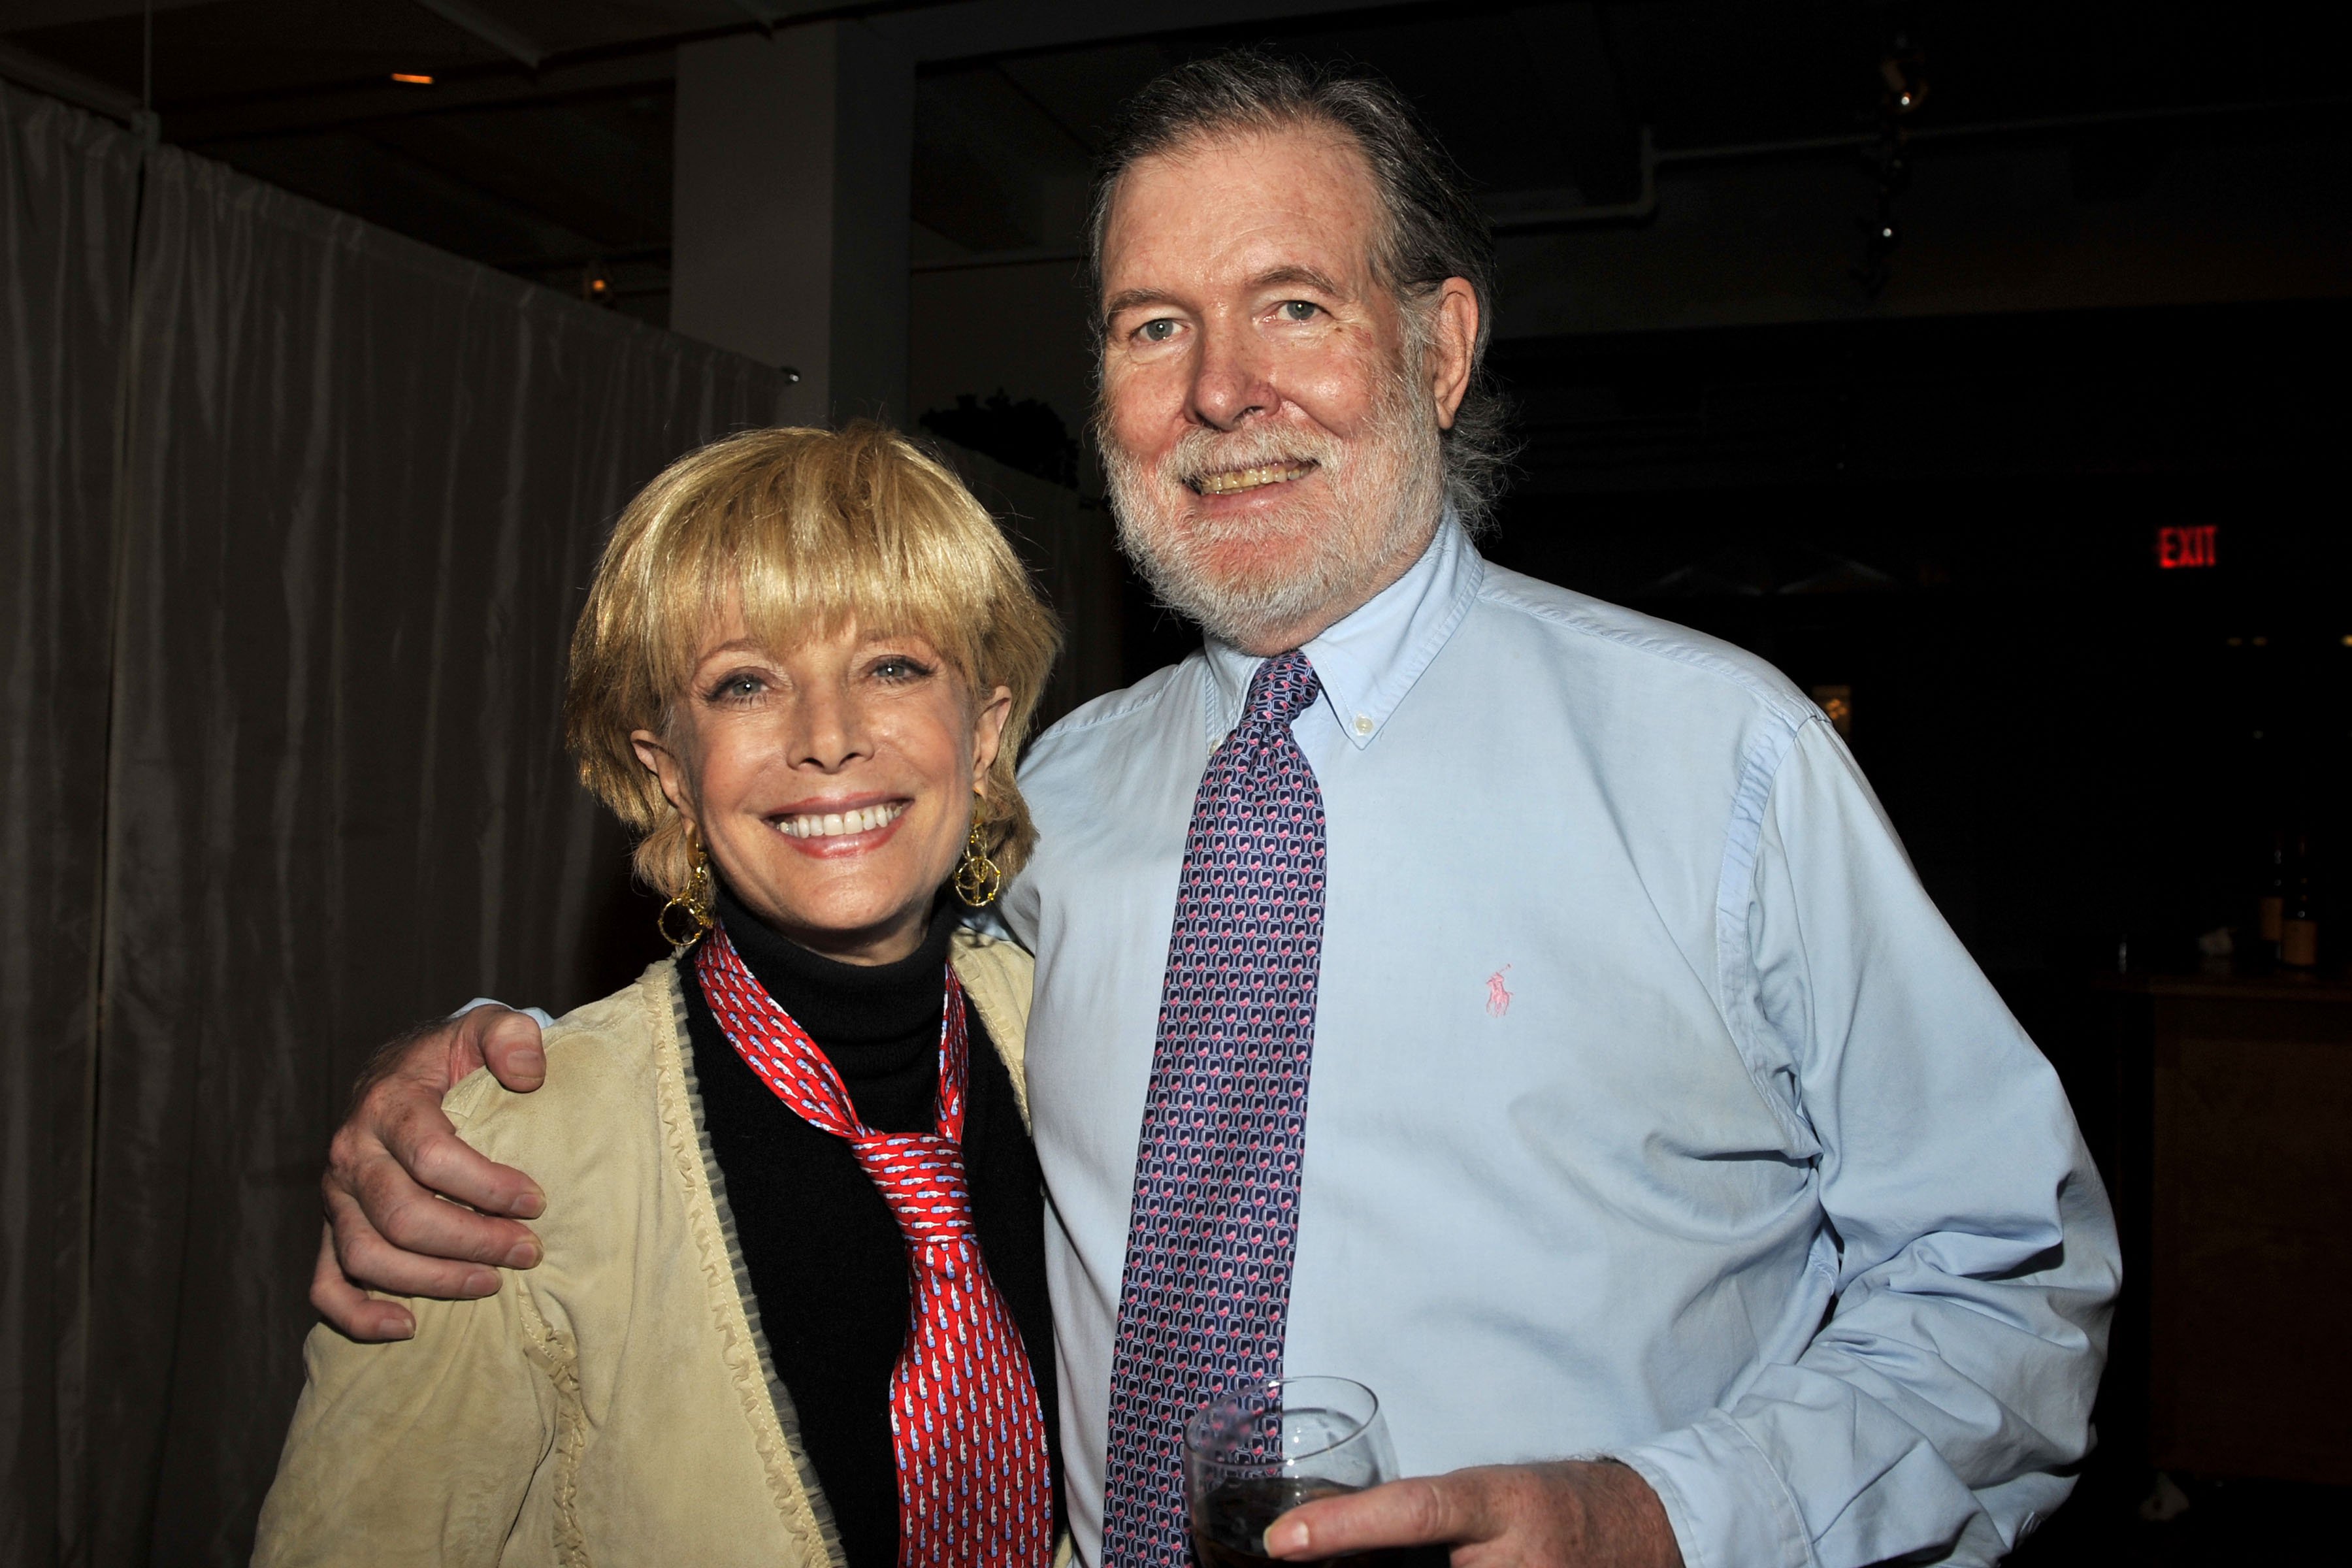  Lesley Stahl and Aaron Latham celebrate the Launch of "Little Barrel" on November 7, 2008, in New York City. | Source: Getty Images.